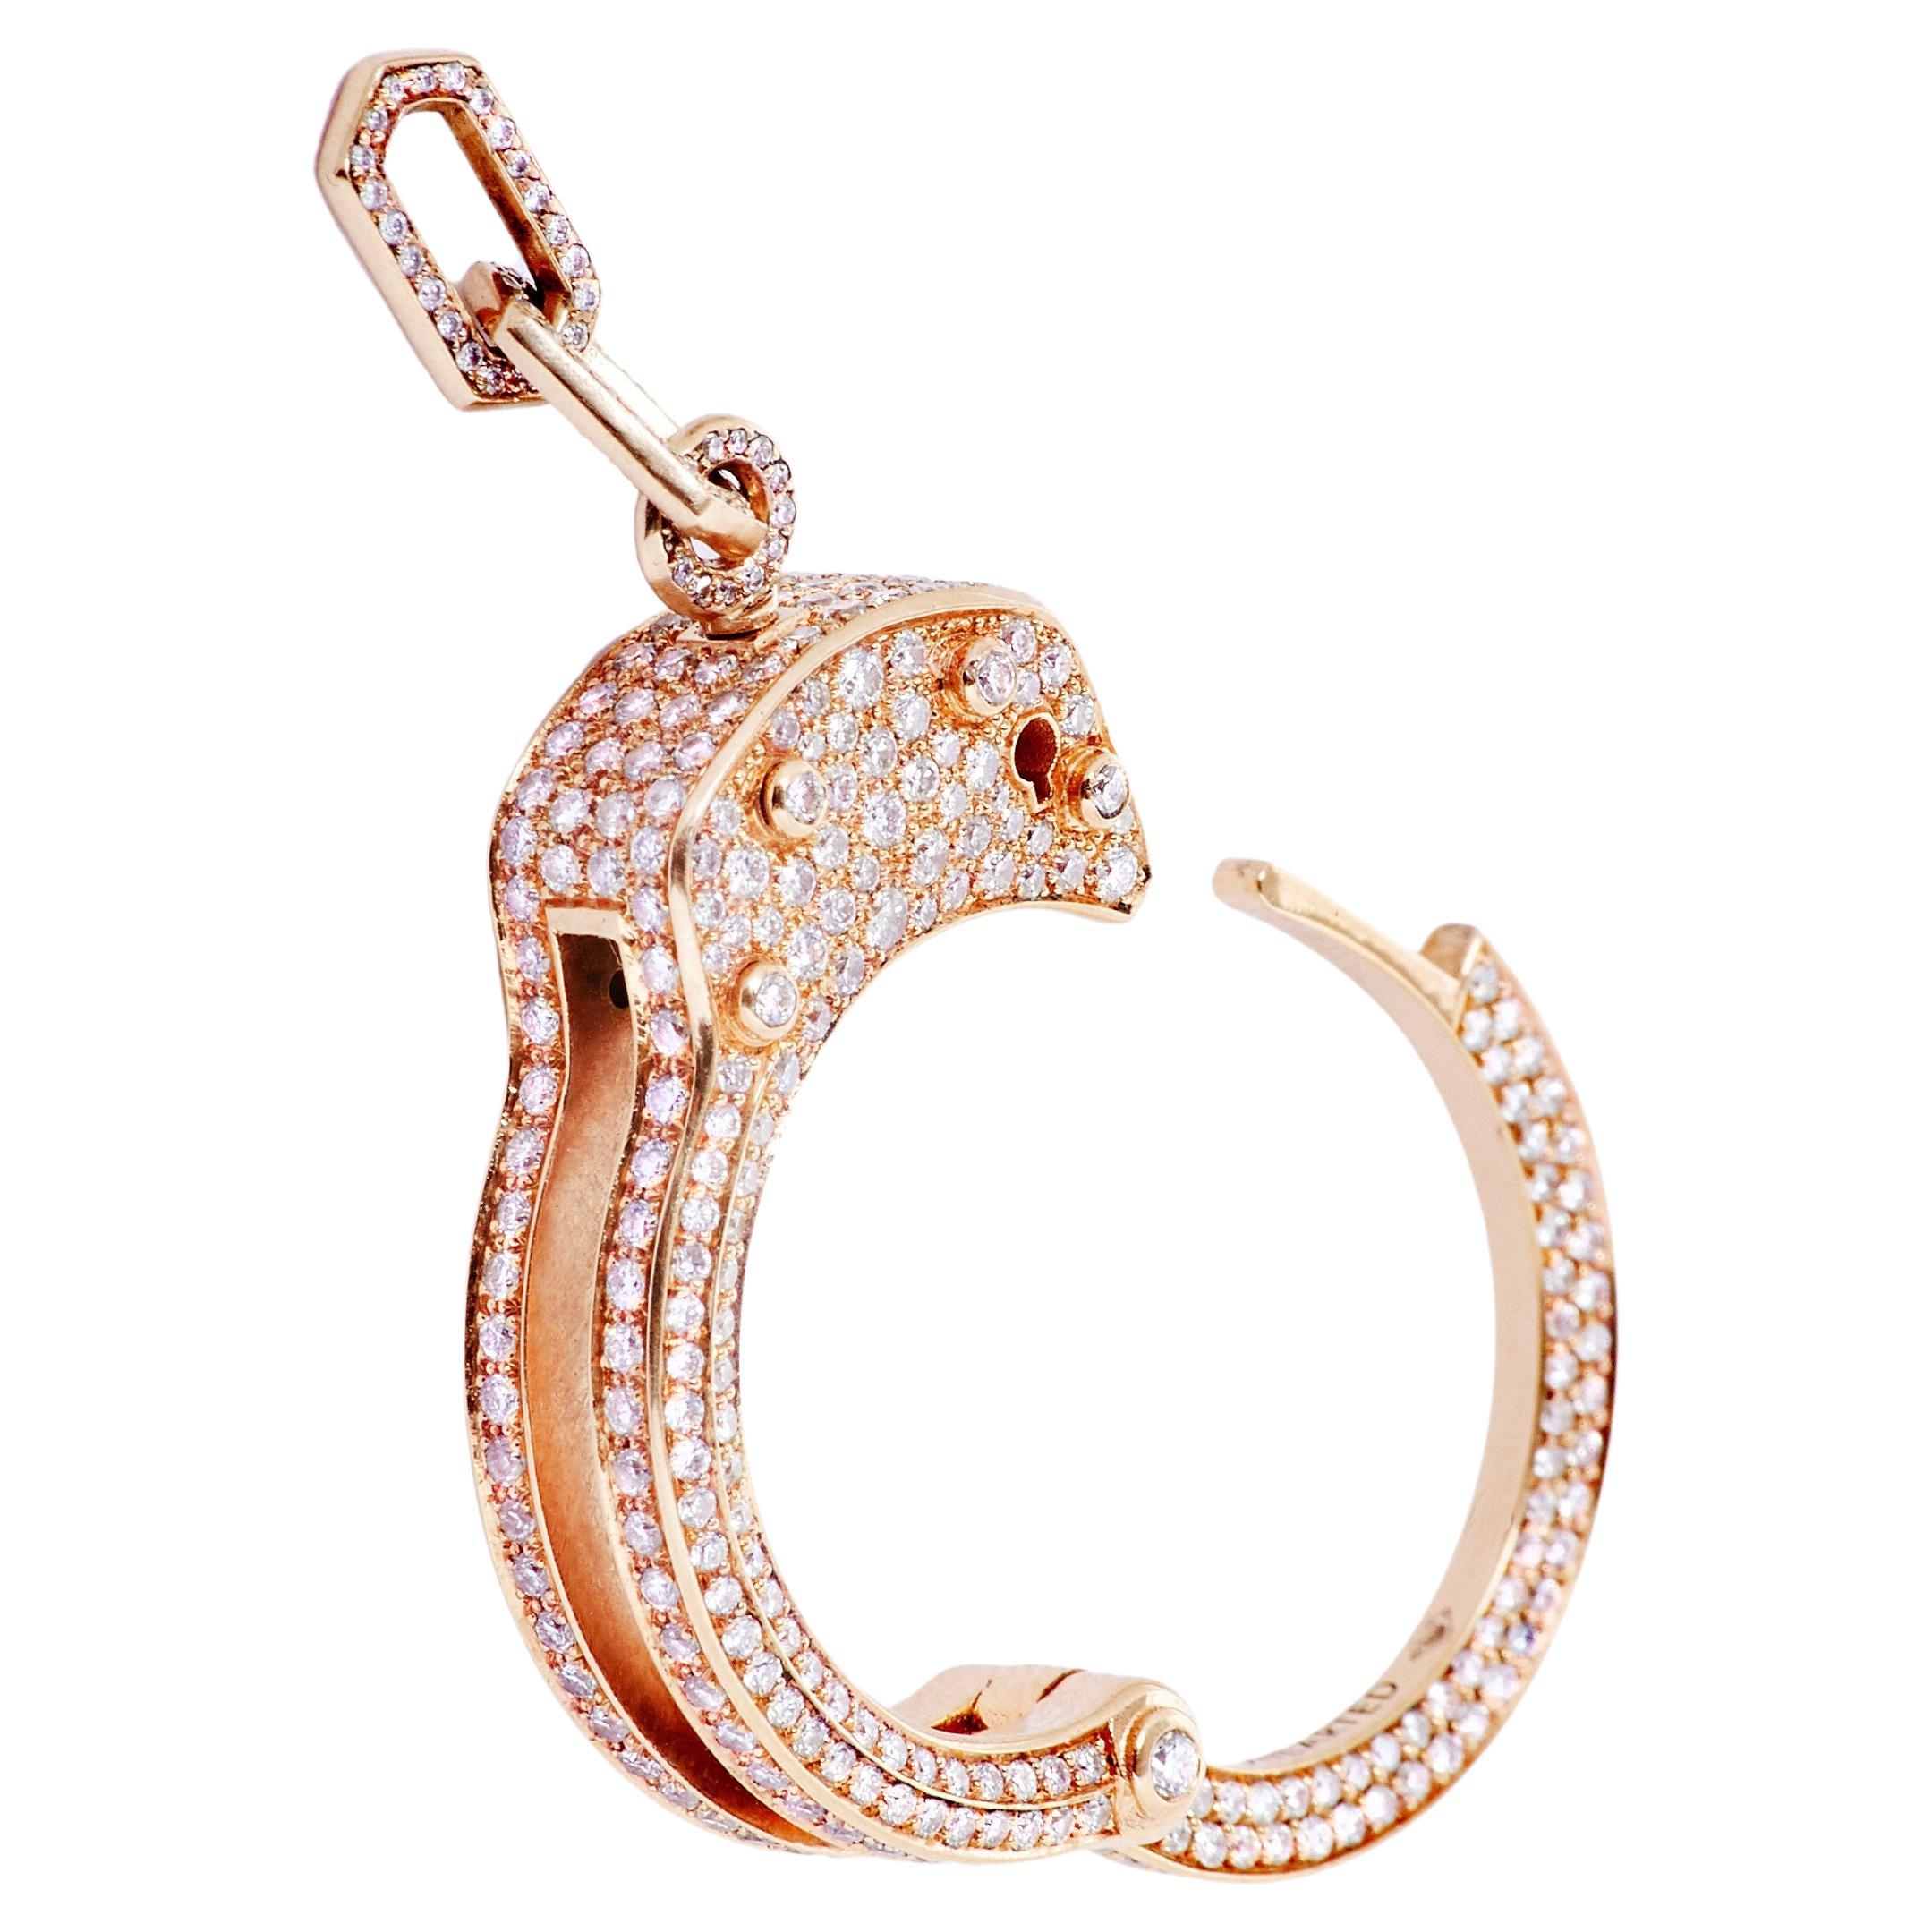 Cohearted Ring / Necklace - 18k Yellow Gold and diamonds - 2.61 carat